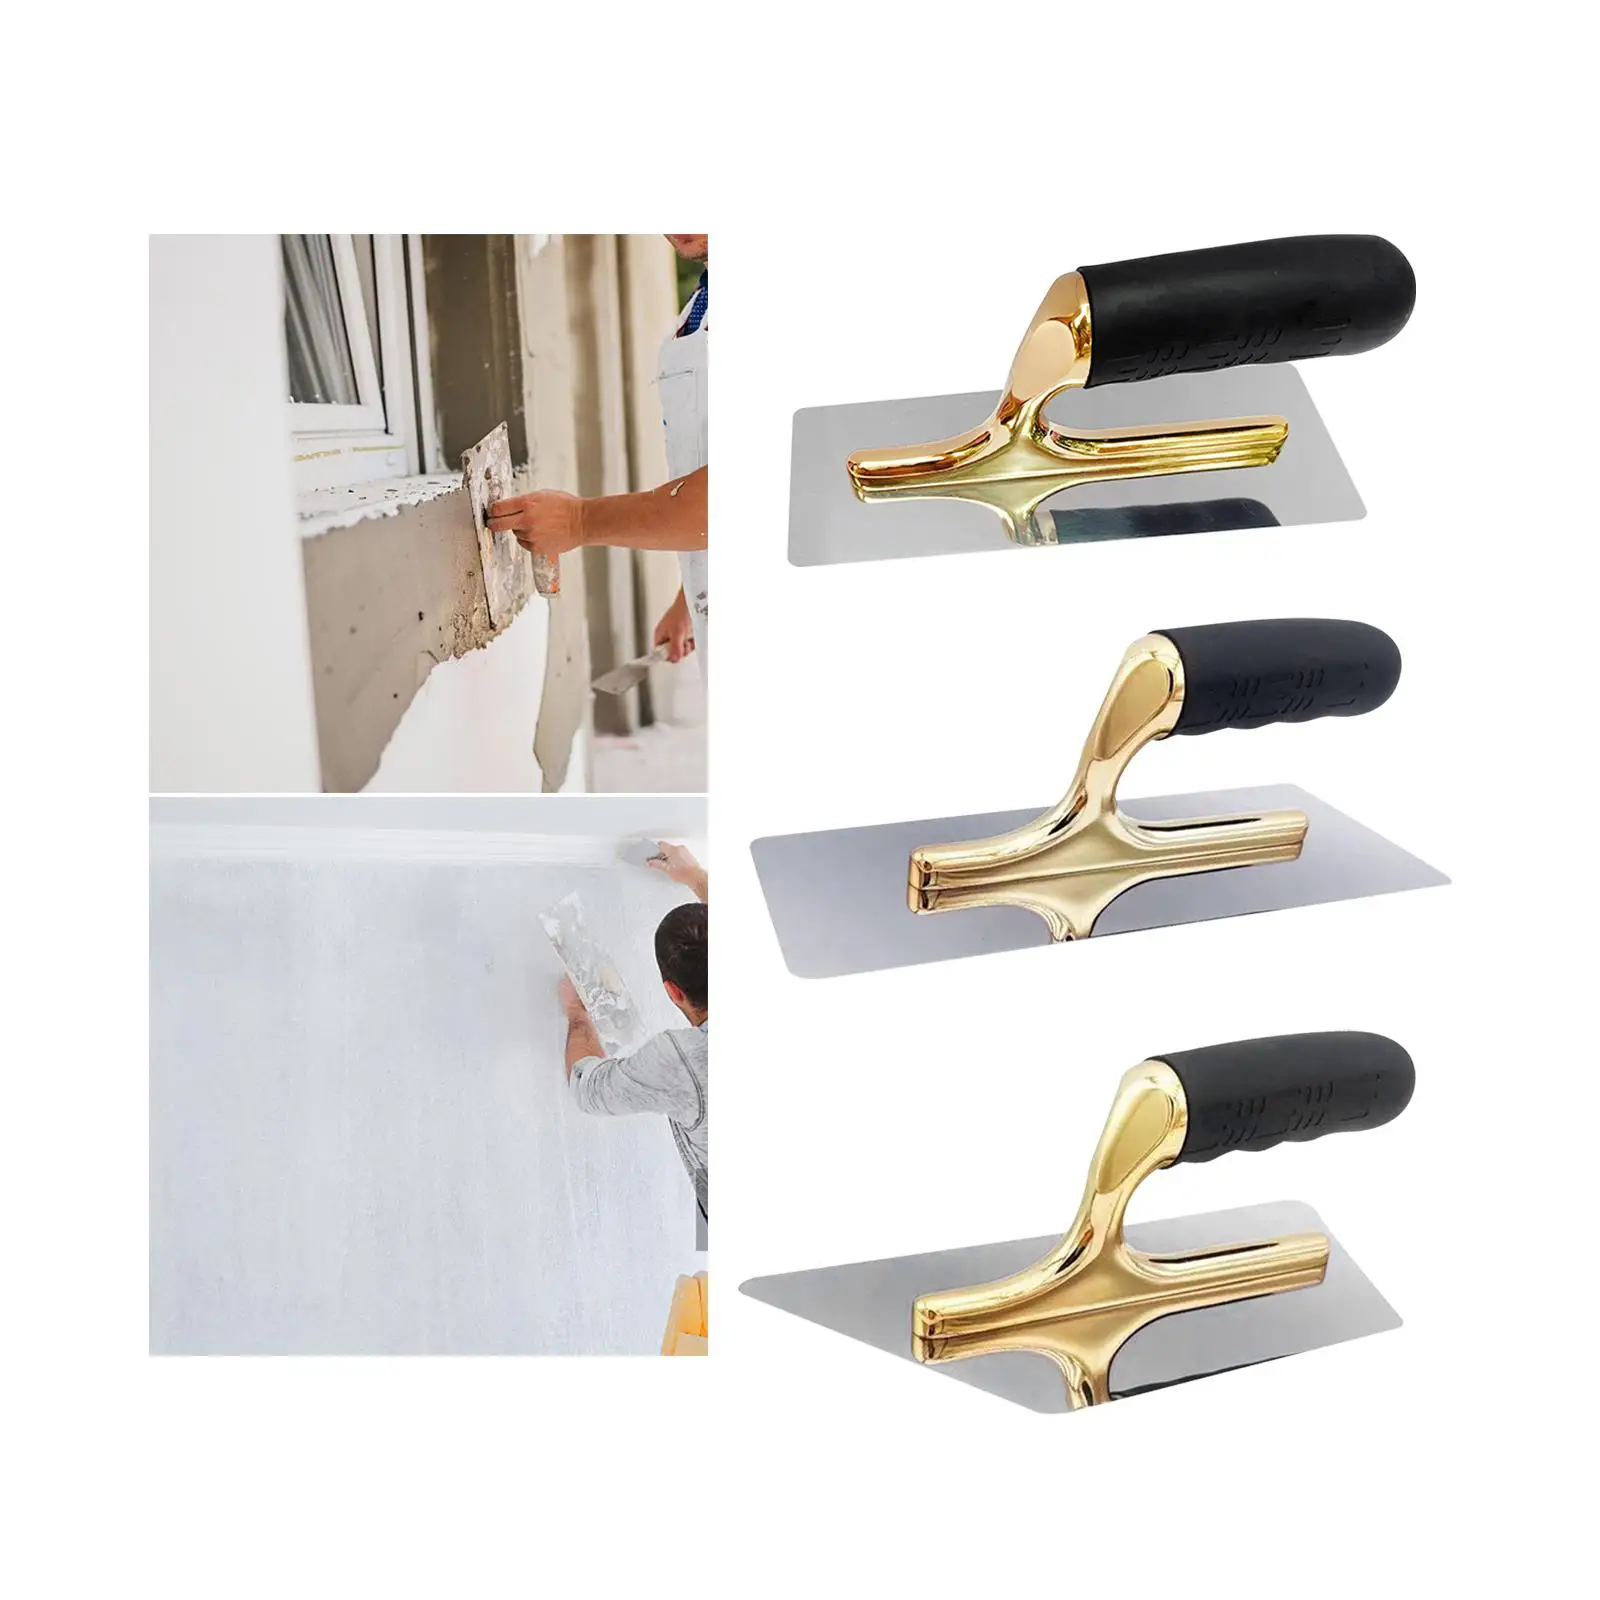 Plastering Trowel Stainless Steel Soft Handle Plaster Cement Putty Scraper Drywall Trowels for Wall Decoration Stucco Cement